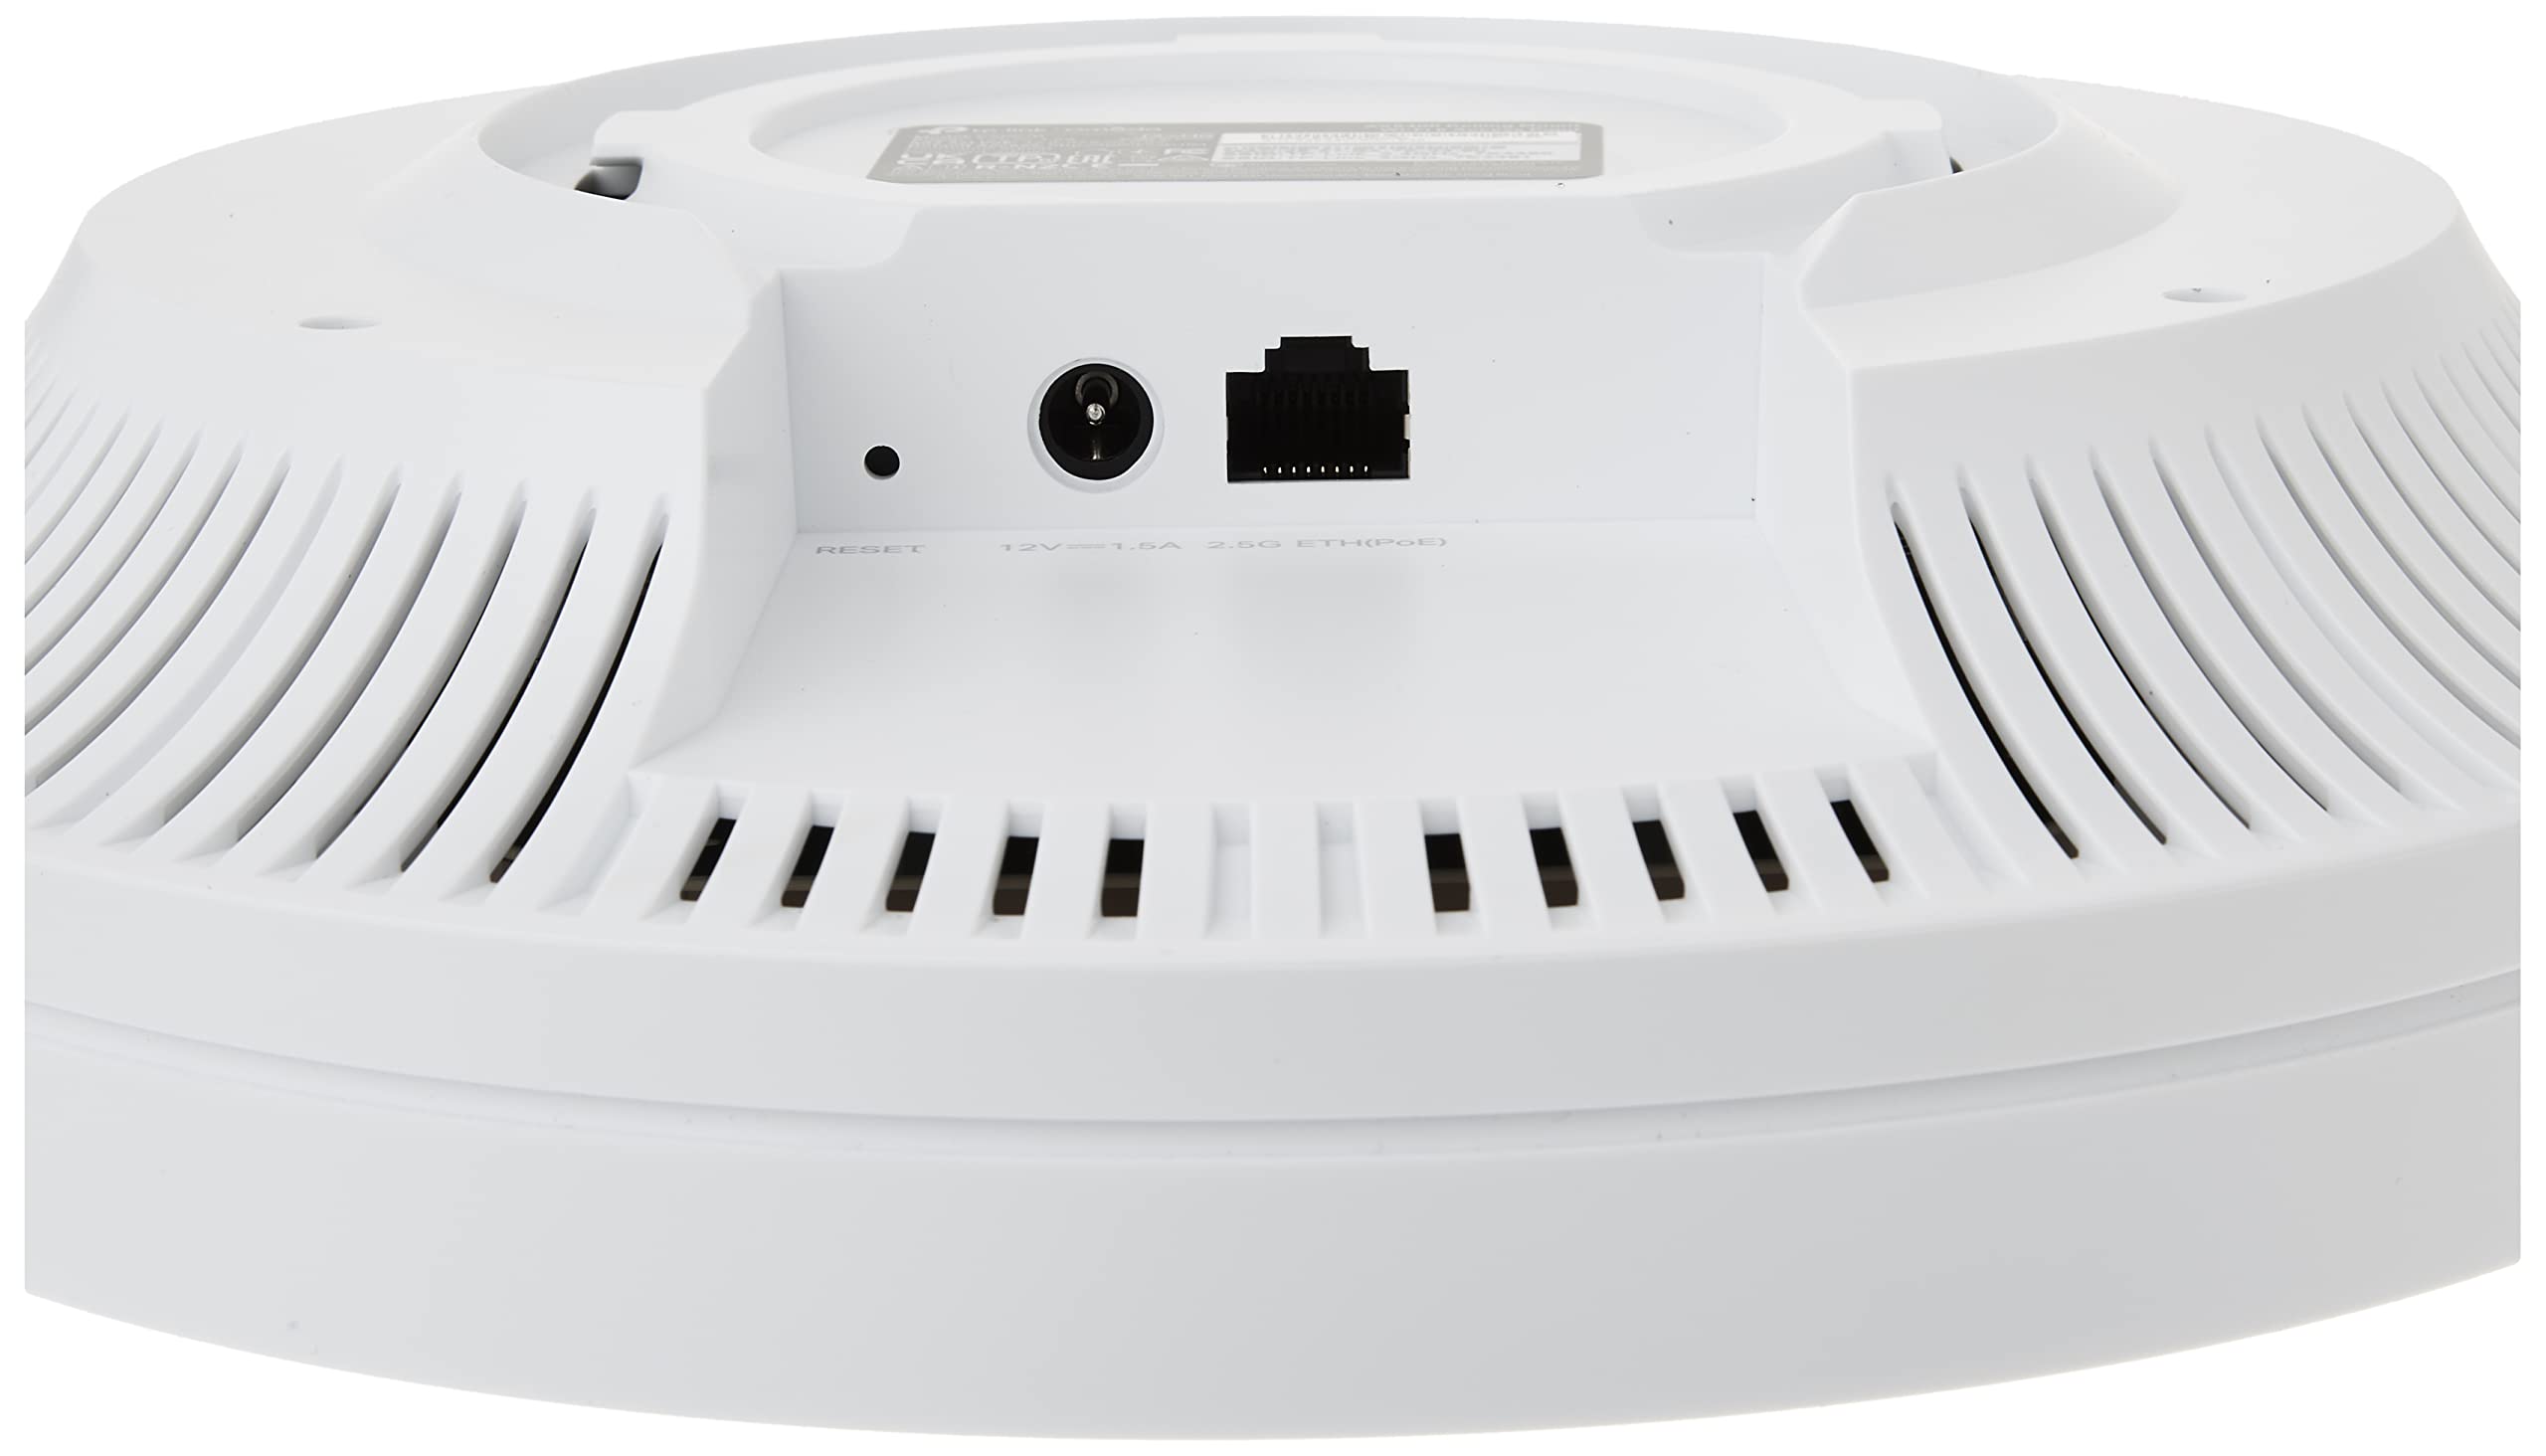 TP-Link EAP670 | Omada WiFi 6 AX5400 Wireless 2.5G Ceiling Mount Access Point | Support Mesh, OFDMA, Seamless Roaming, HE160 & MU-MIMO | SDN Integrated | Cloud Access & Omada App | PoE+ Powered, White